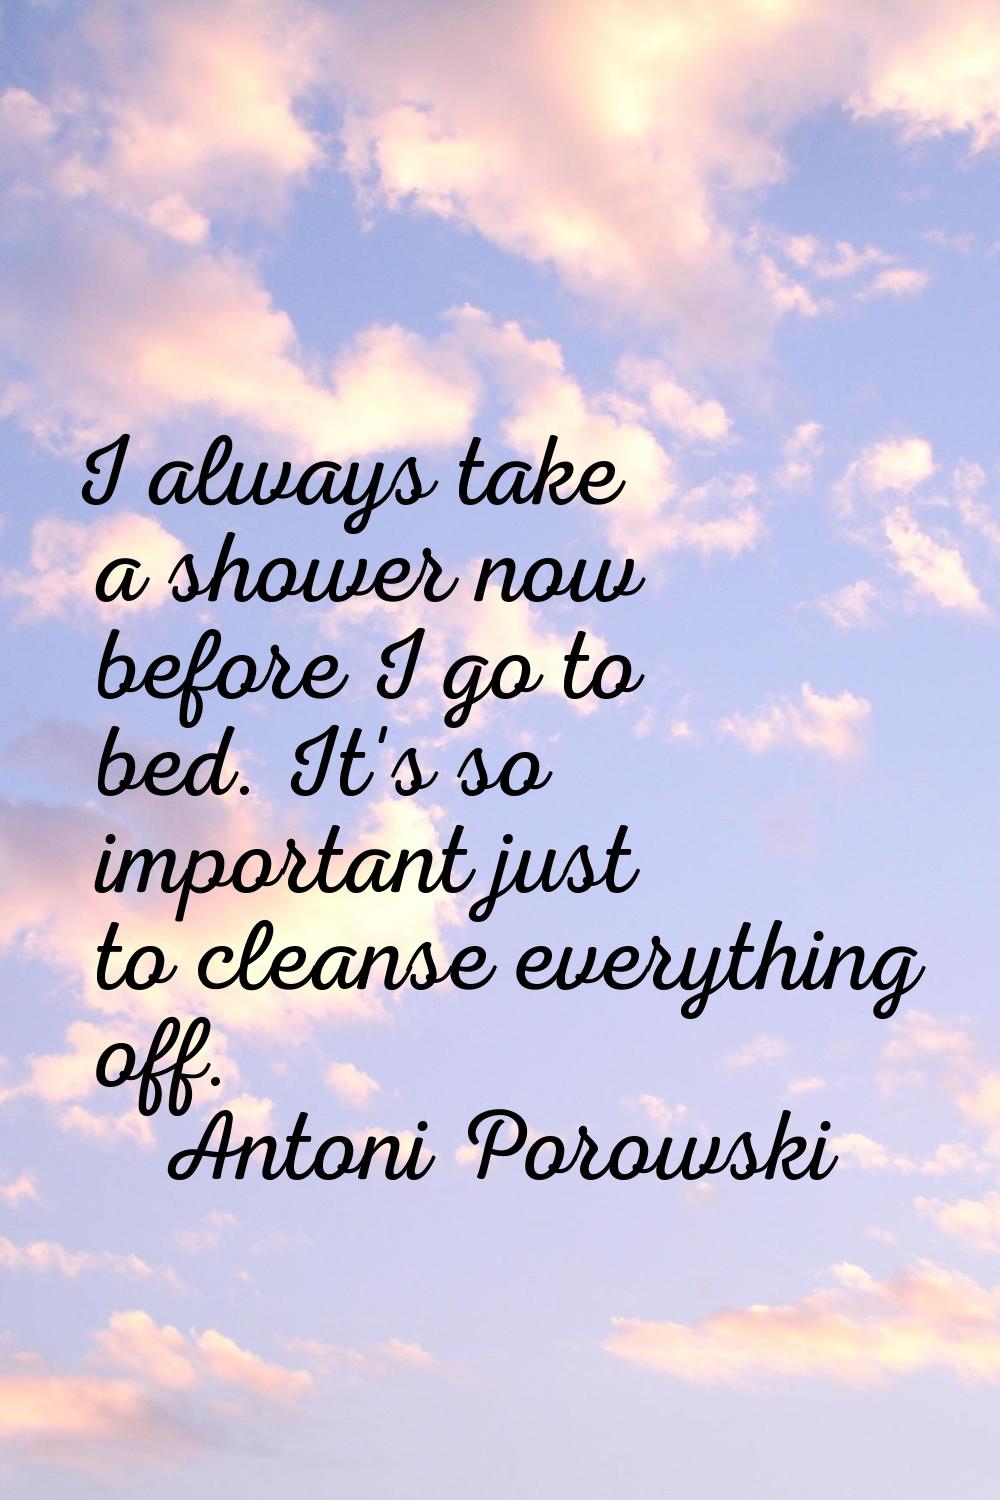 I always take a shower now before I go to bed. It's so important just to cleanse everything off.